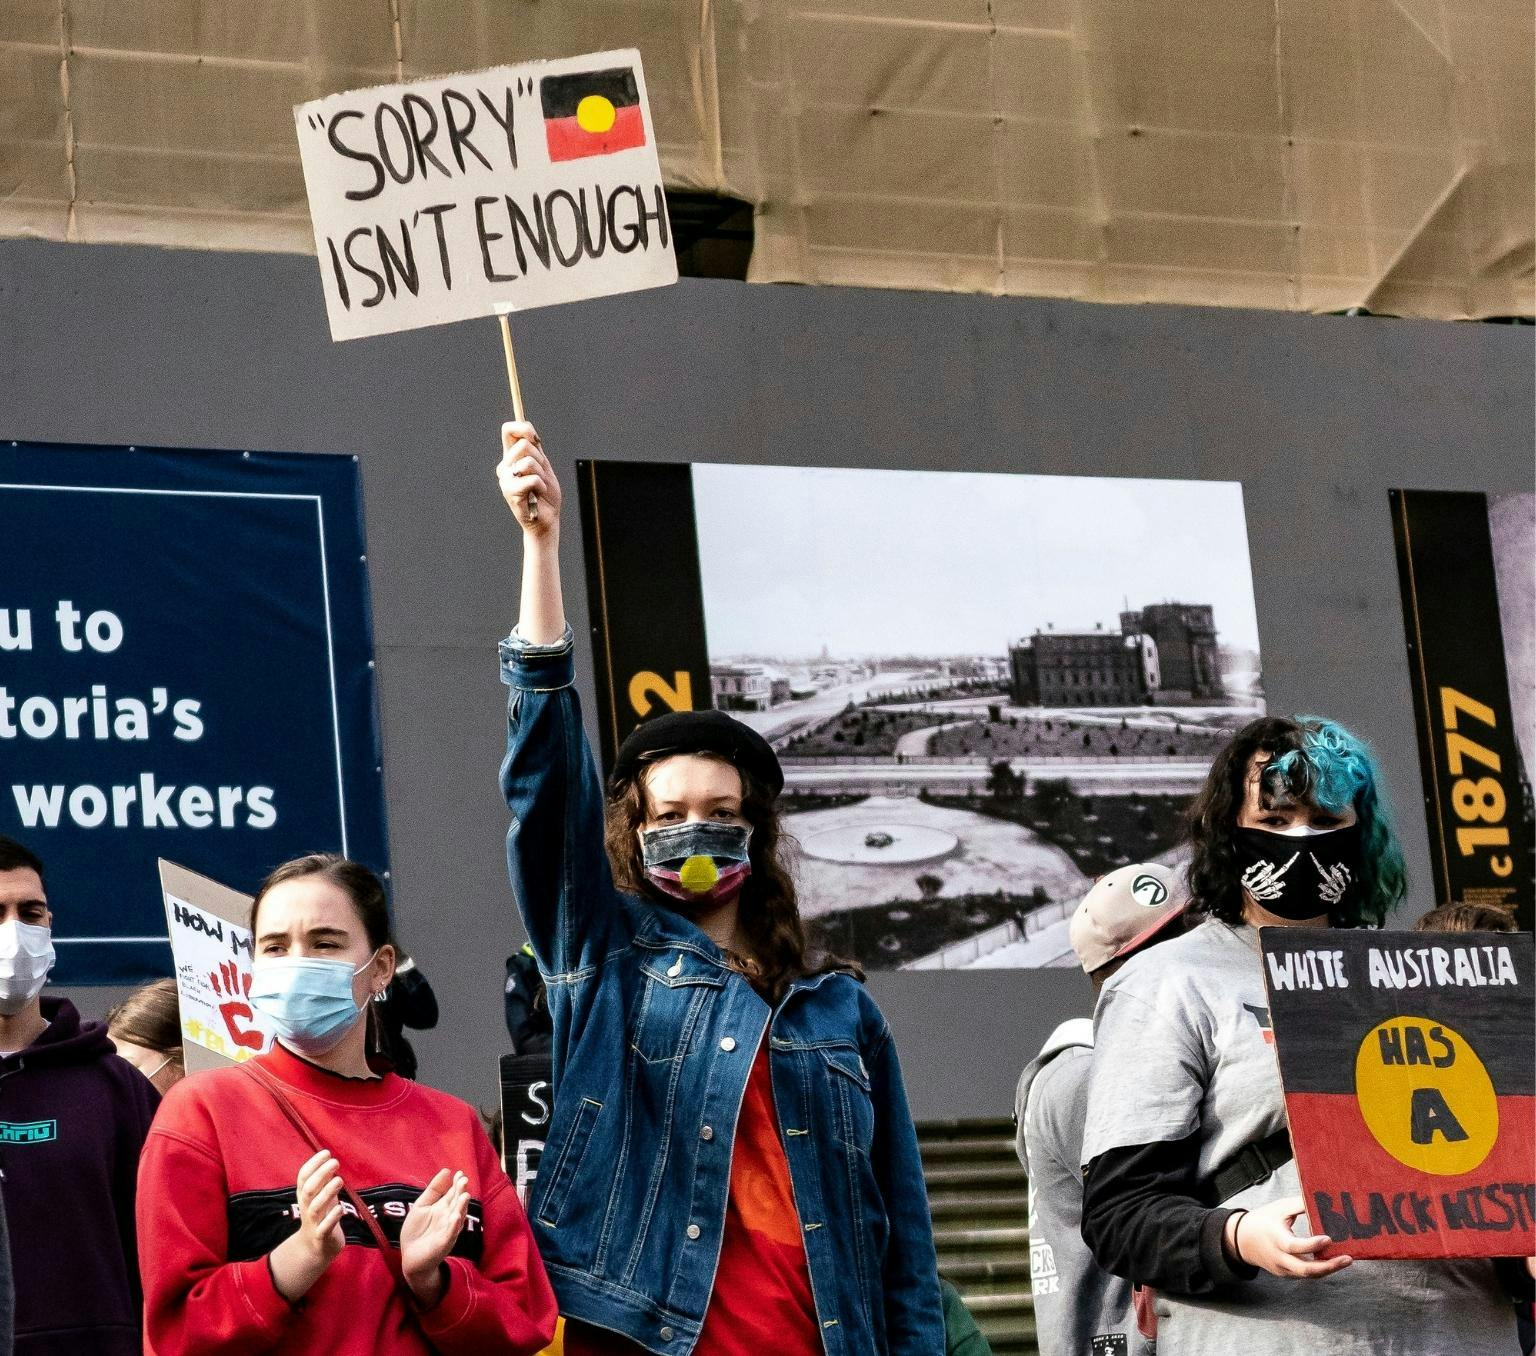 People at a Black Lives Matter protest in Australia. People are wearing red yellow and black and masks. One person is holding a sign that reads "sorry isn't enough".